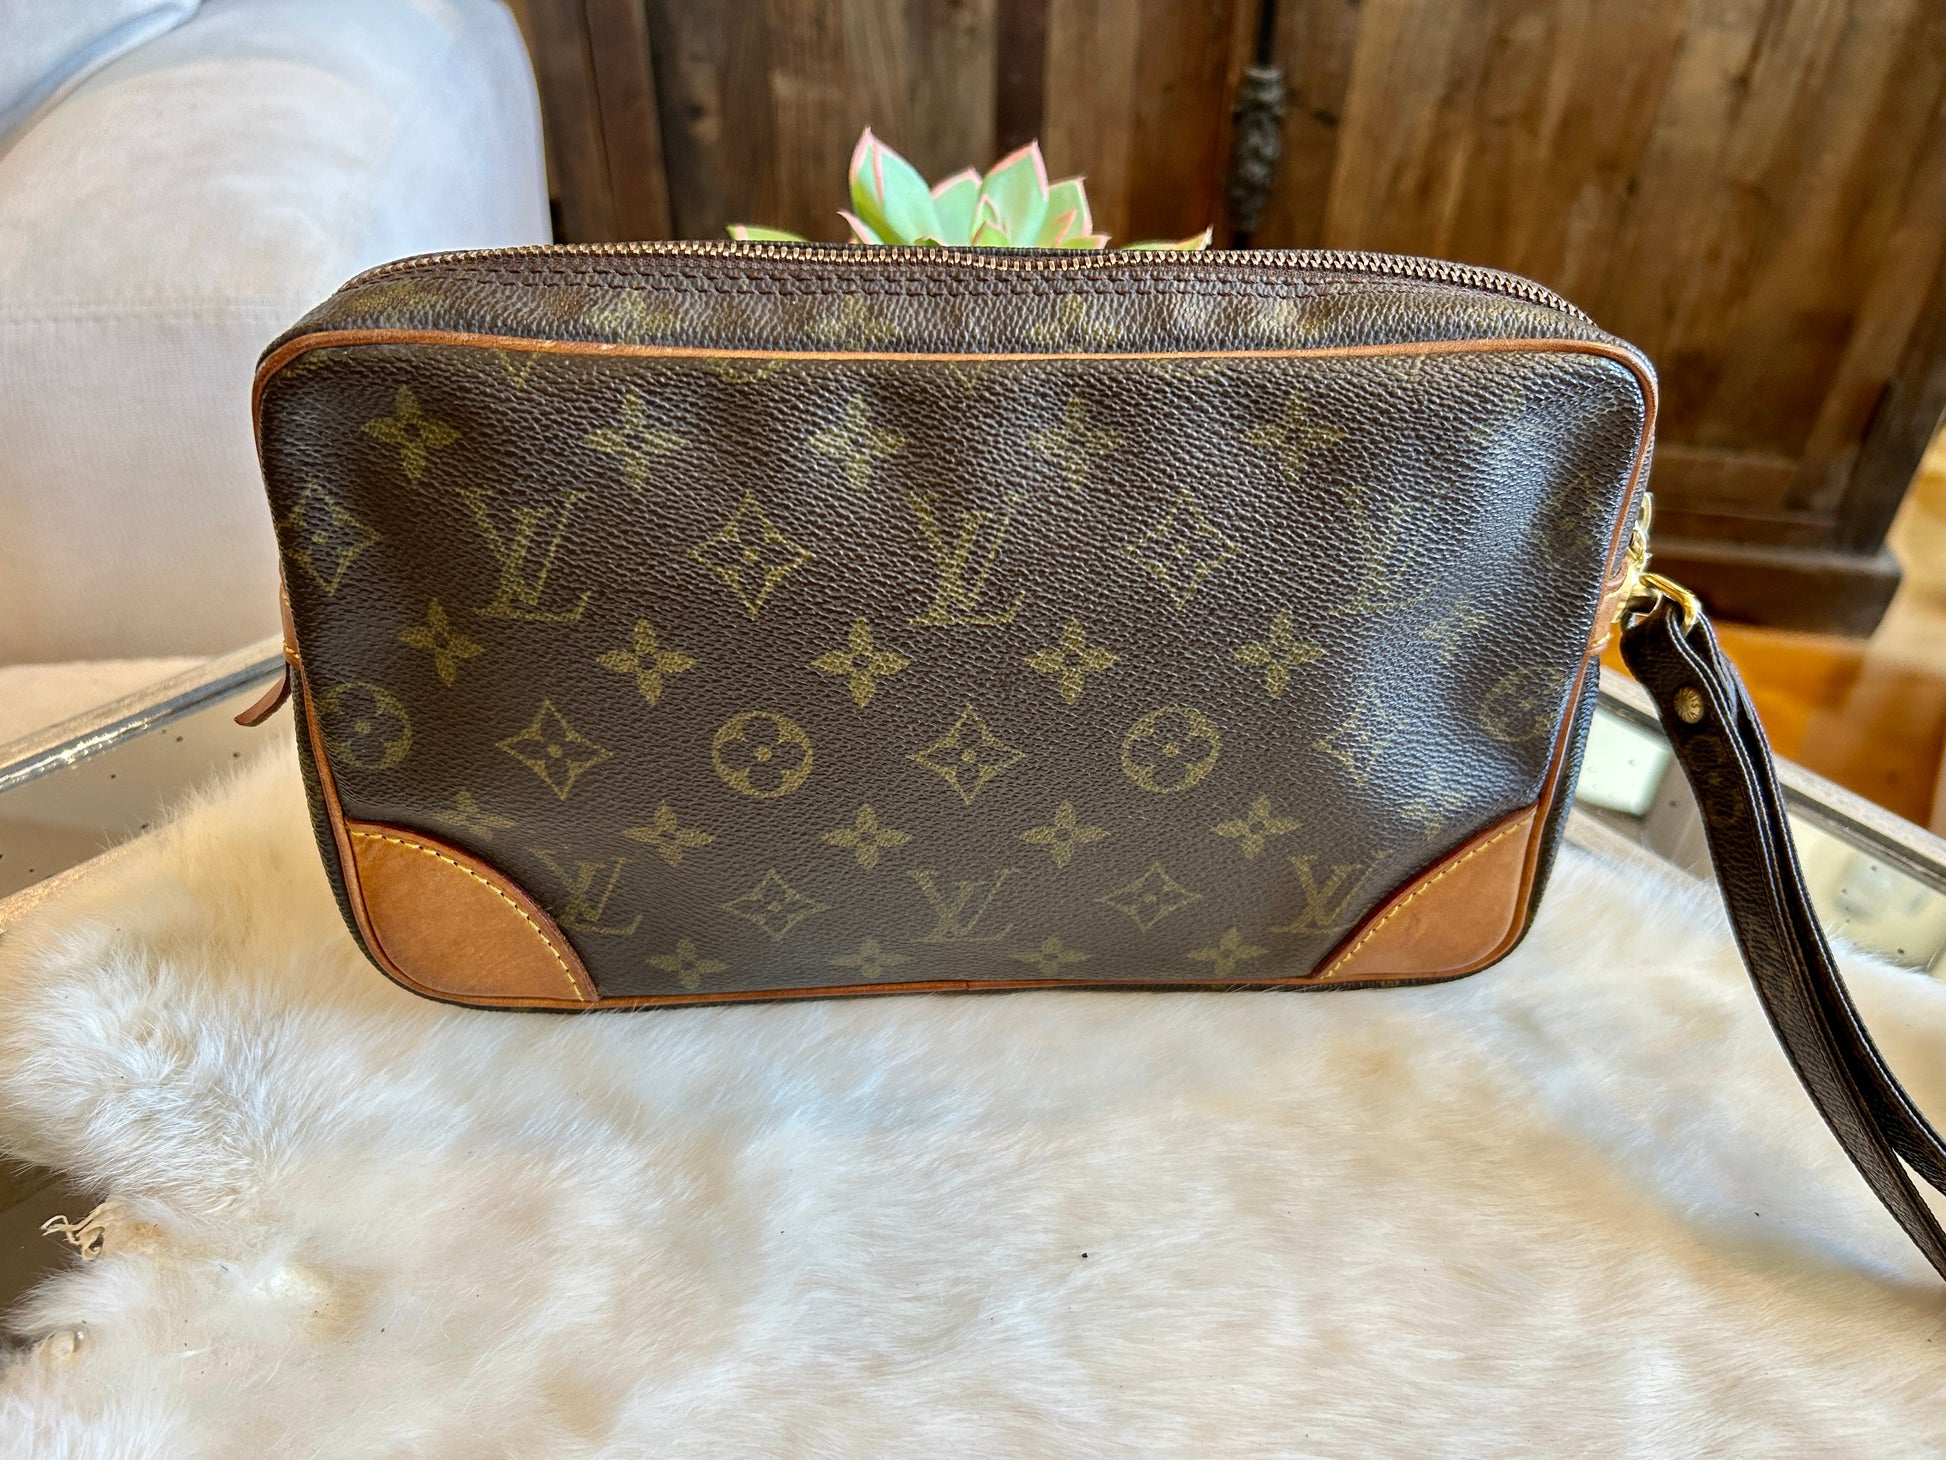 Louis Vuitton - Authenticated Marly Dragonne Clutch Bag - Cloth Brown for Women, Good Condition